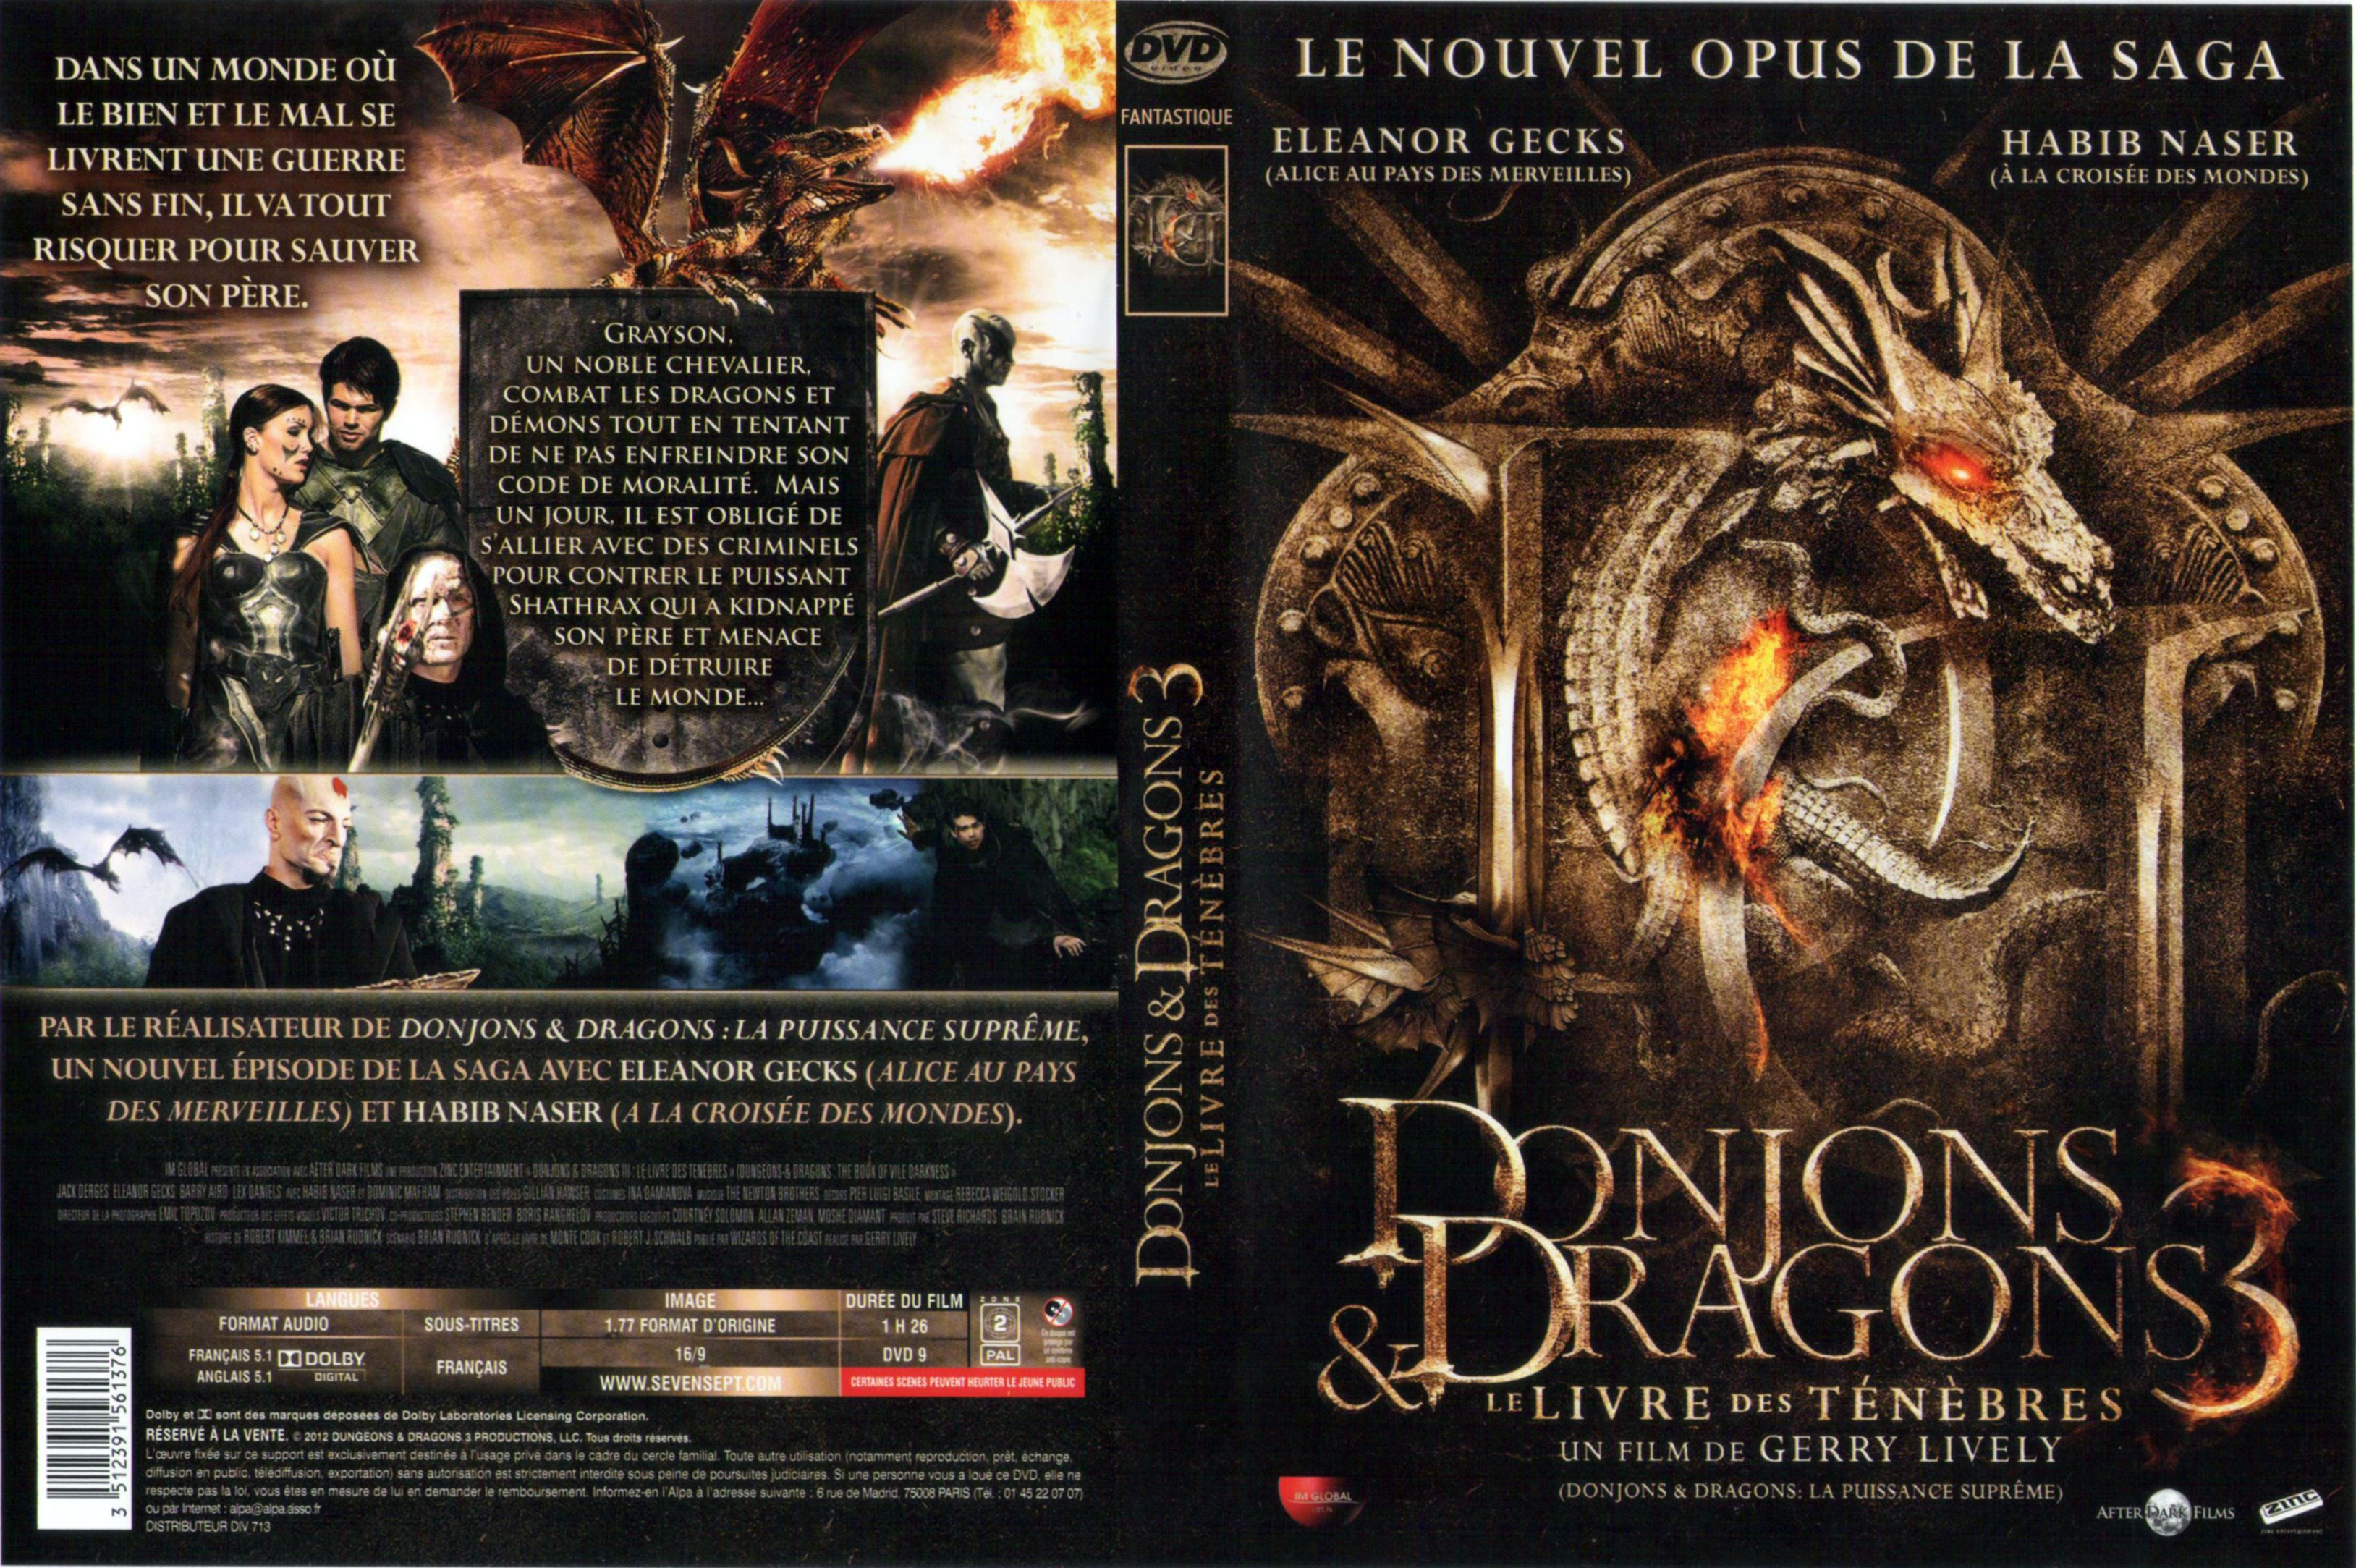 Jaquette DVD Dragons & Donjons 3